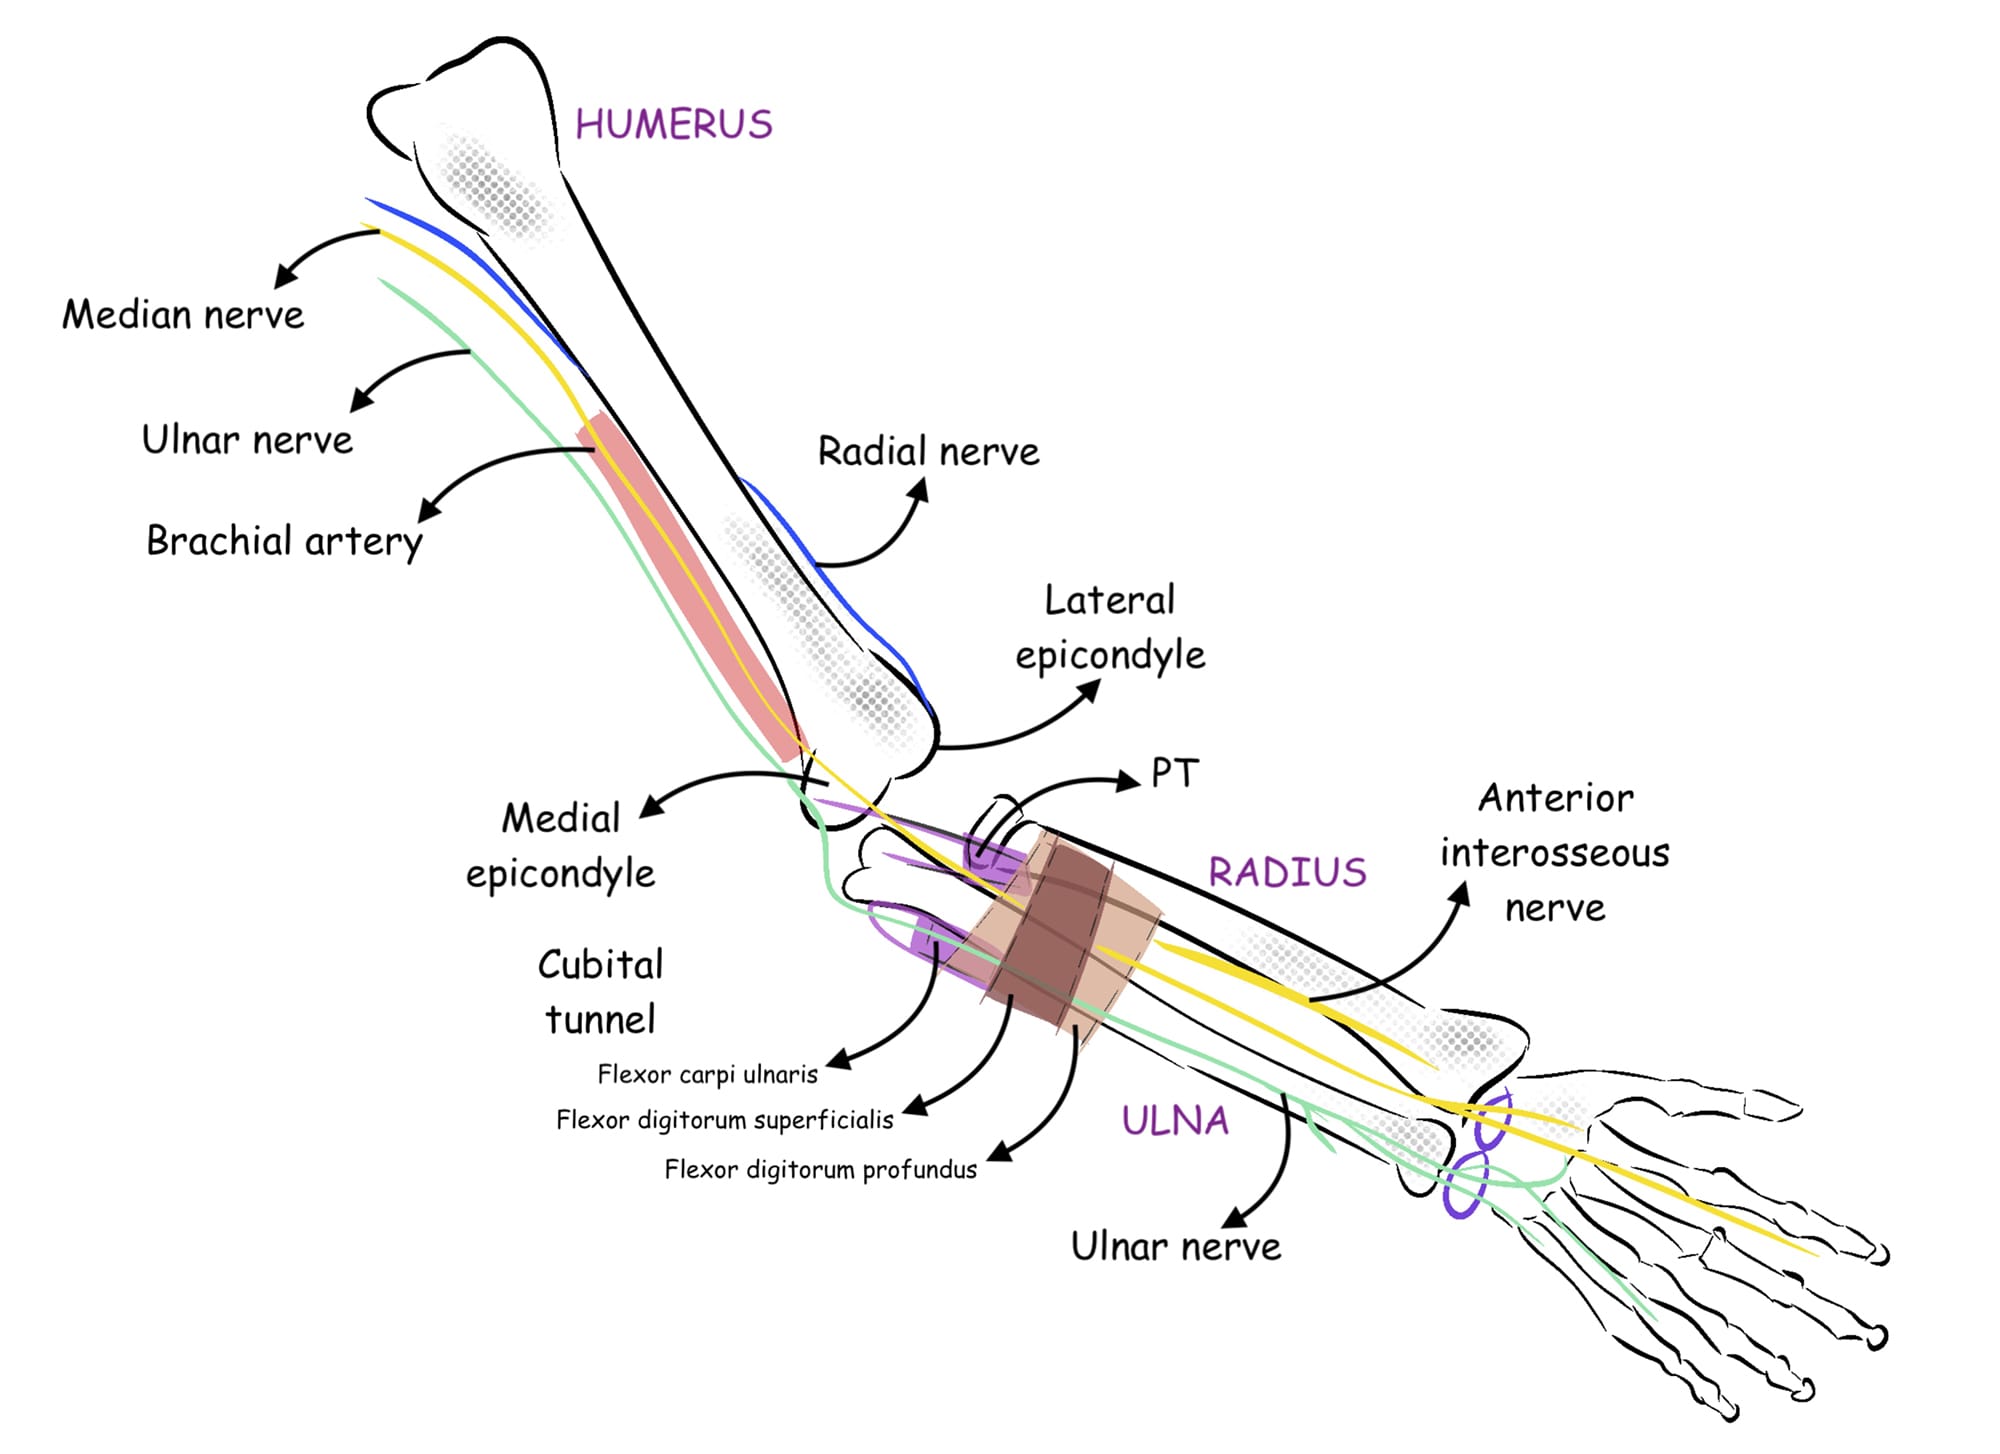 Cureus  Relationship of the Median and Radial Nerves at the Elbow